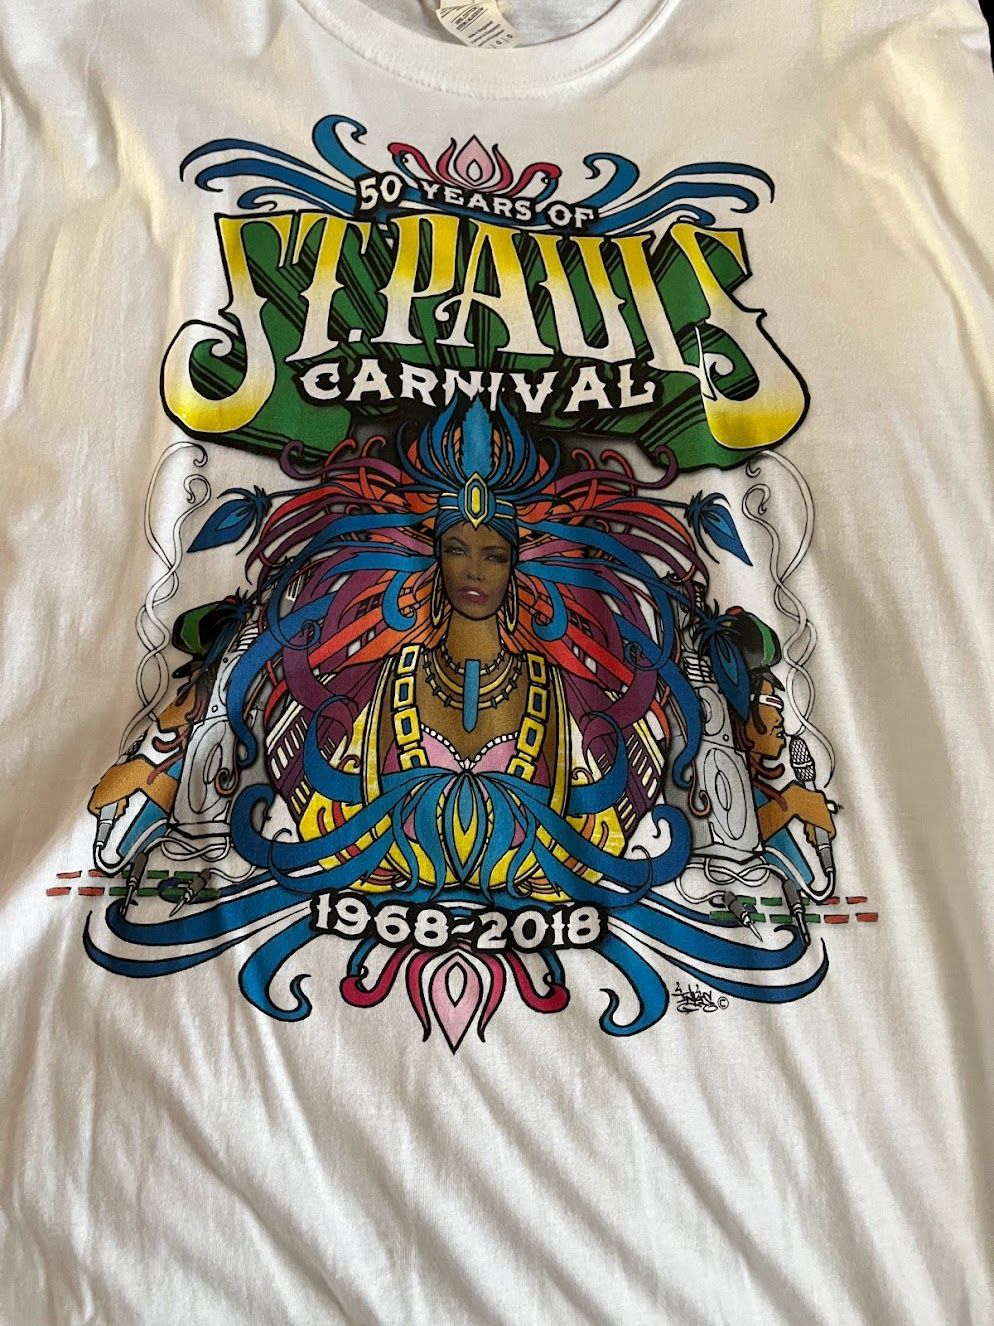 St Pauls Carnival 50th Anniversary t-shirt by Inkie